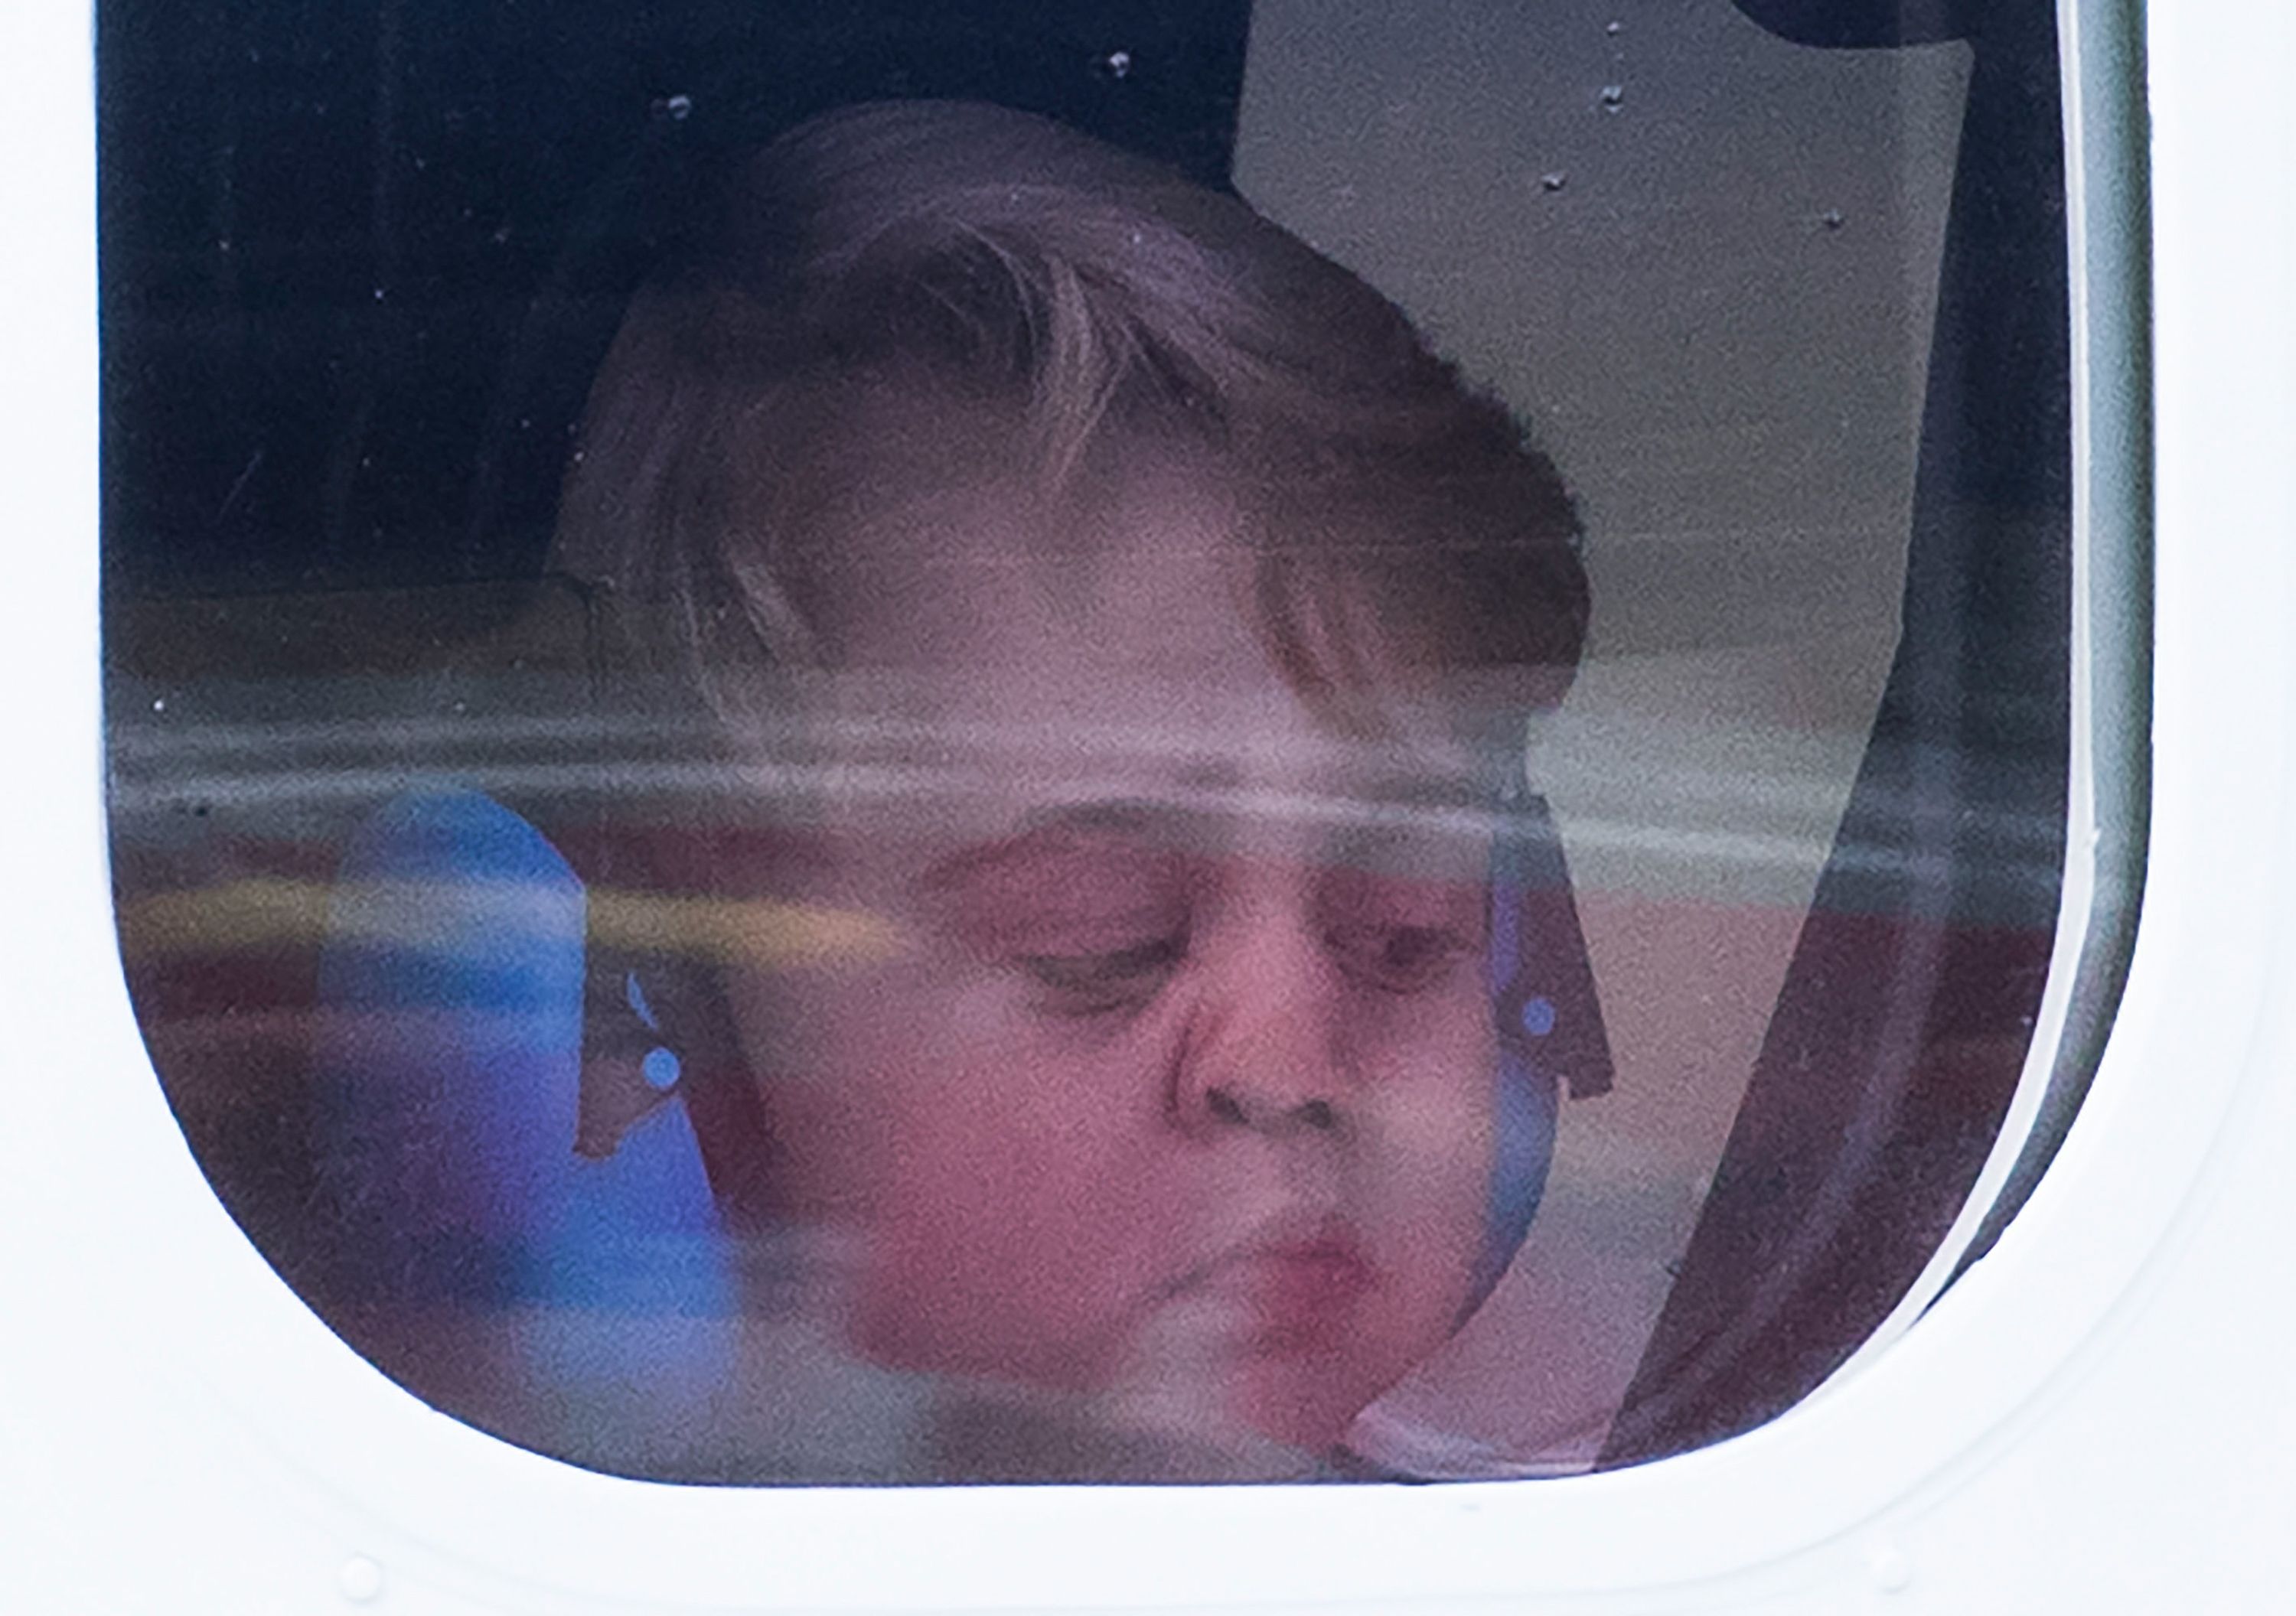 Prince George looks out of the window of a sea plane as he departs Victoria on October 1, 2016 in Victoria, Canada. | Photo: Getty Images